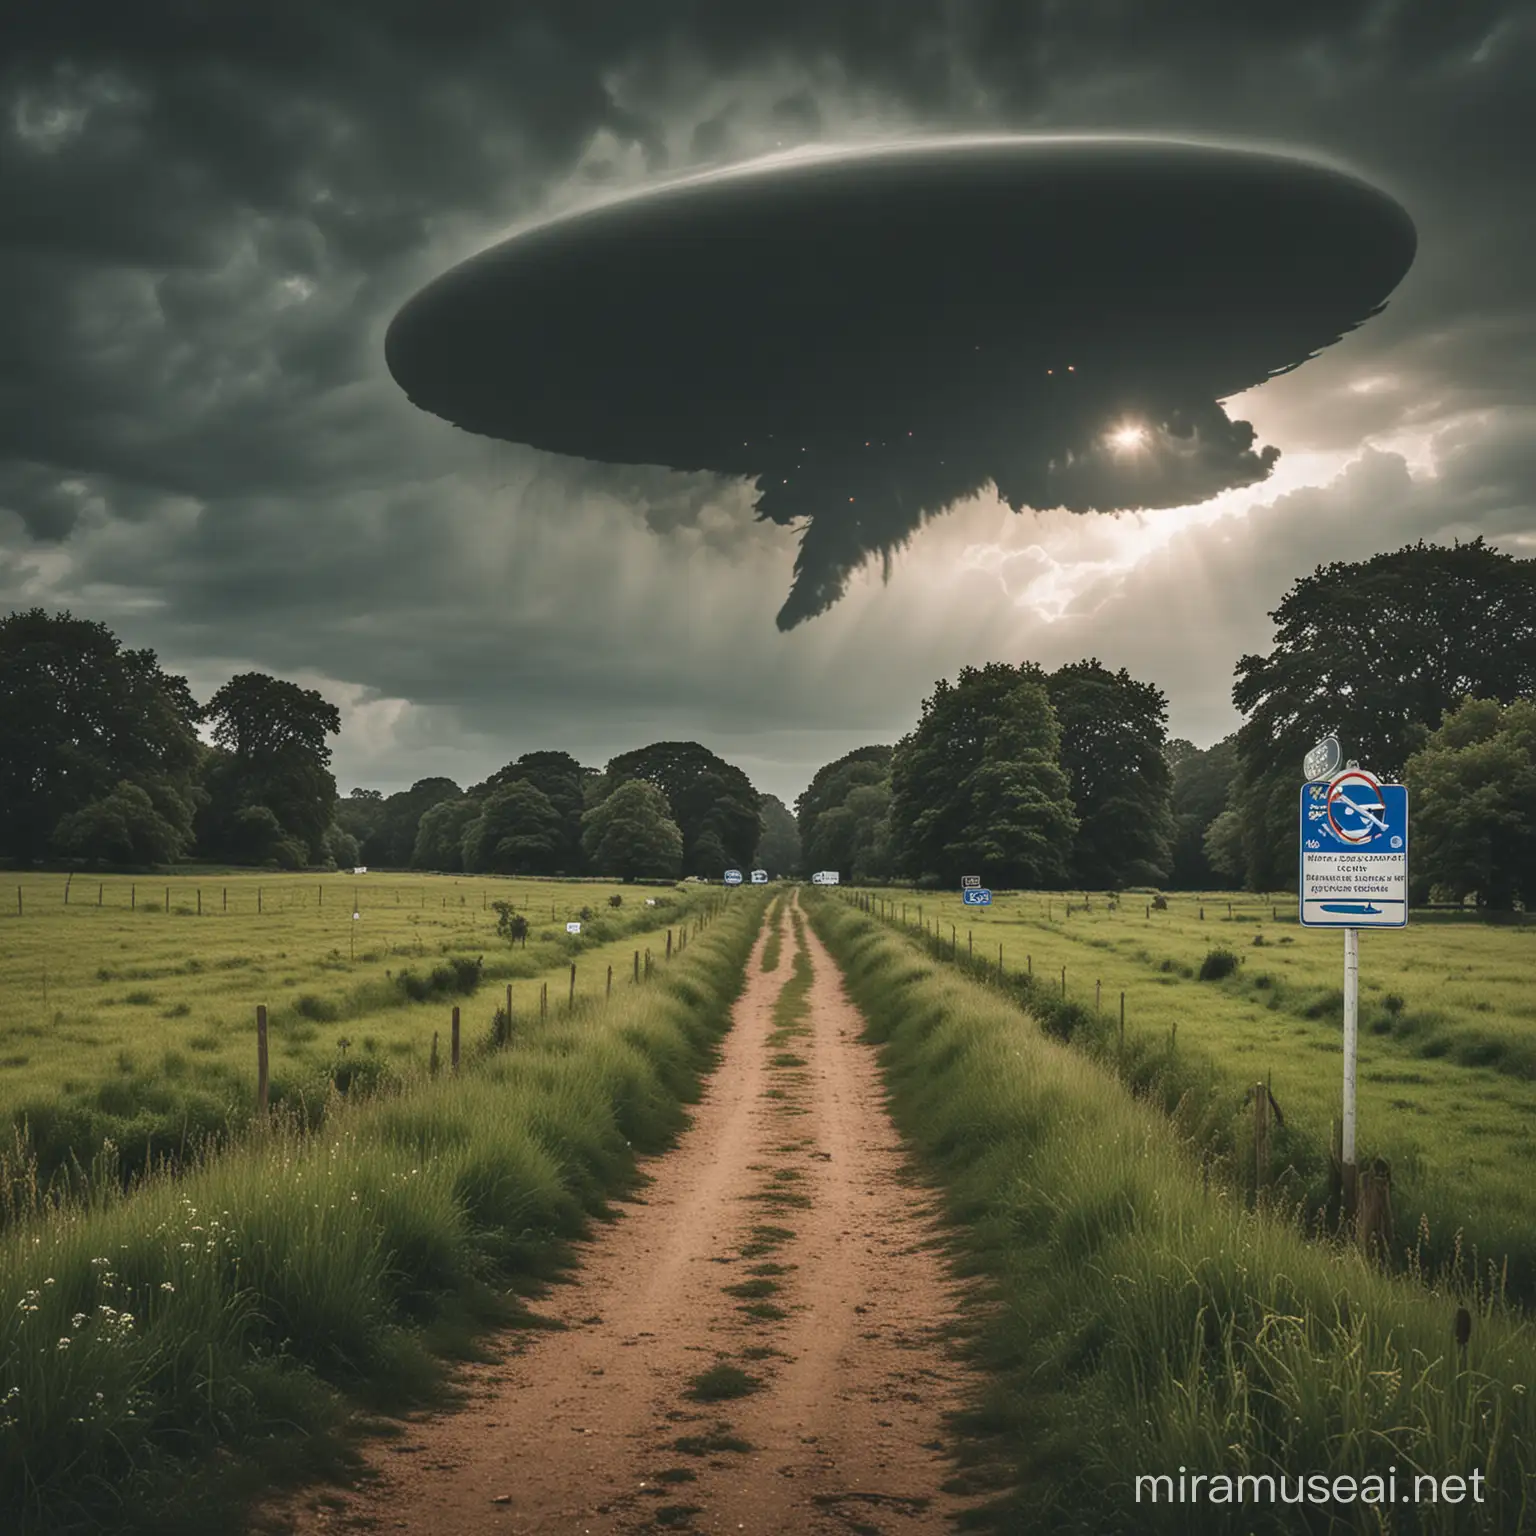 UK Hampshire Landscape with Signs of Alien Invasion